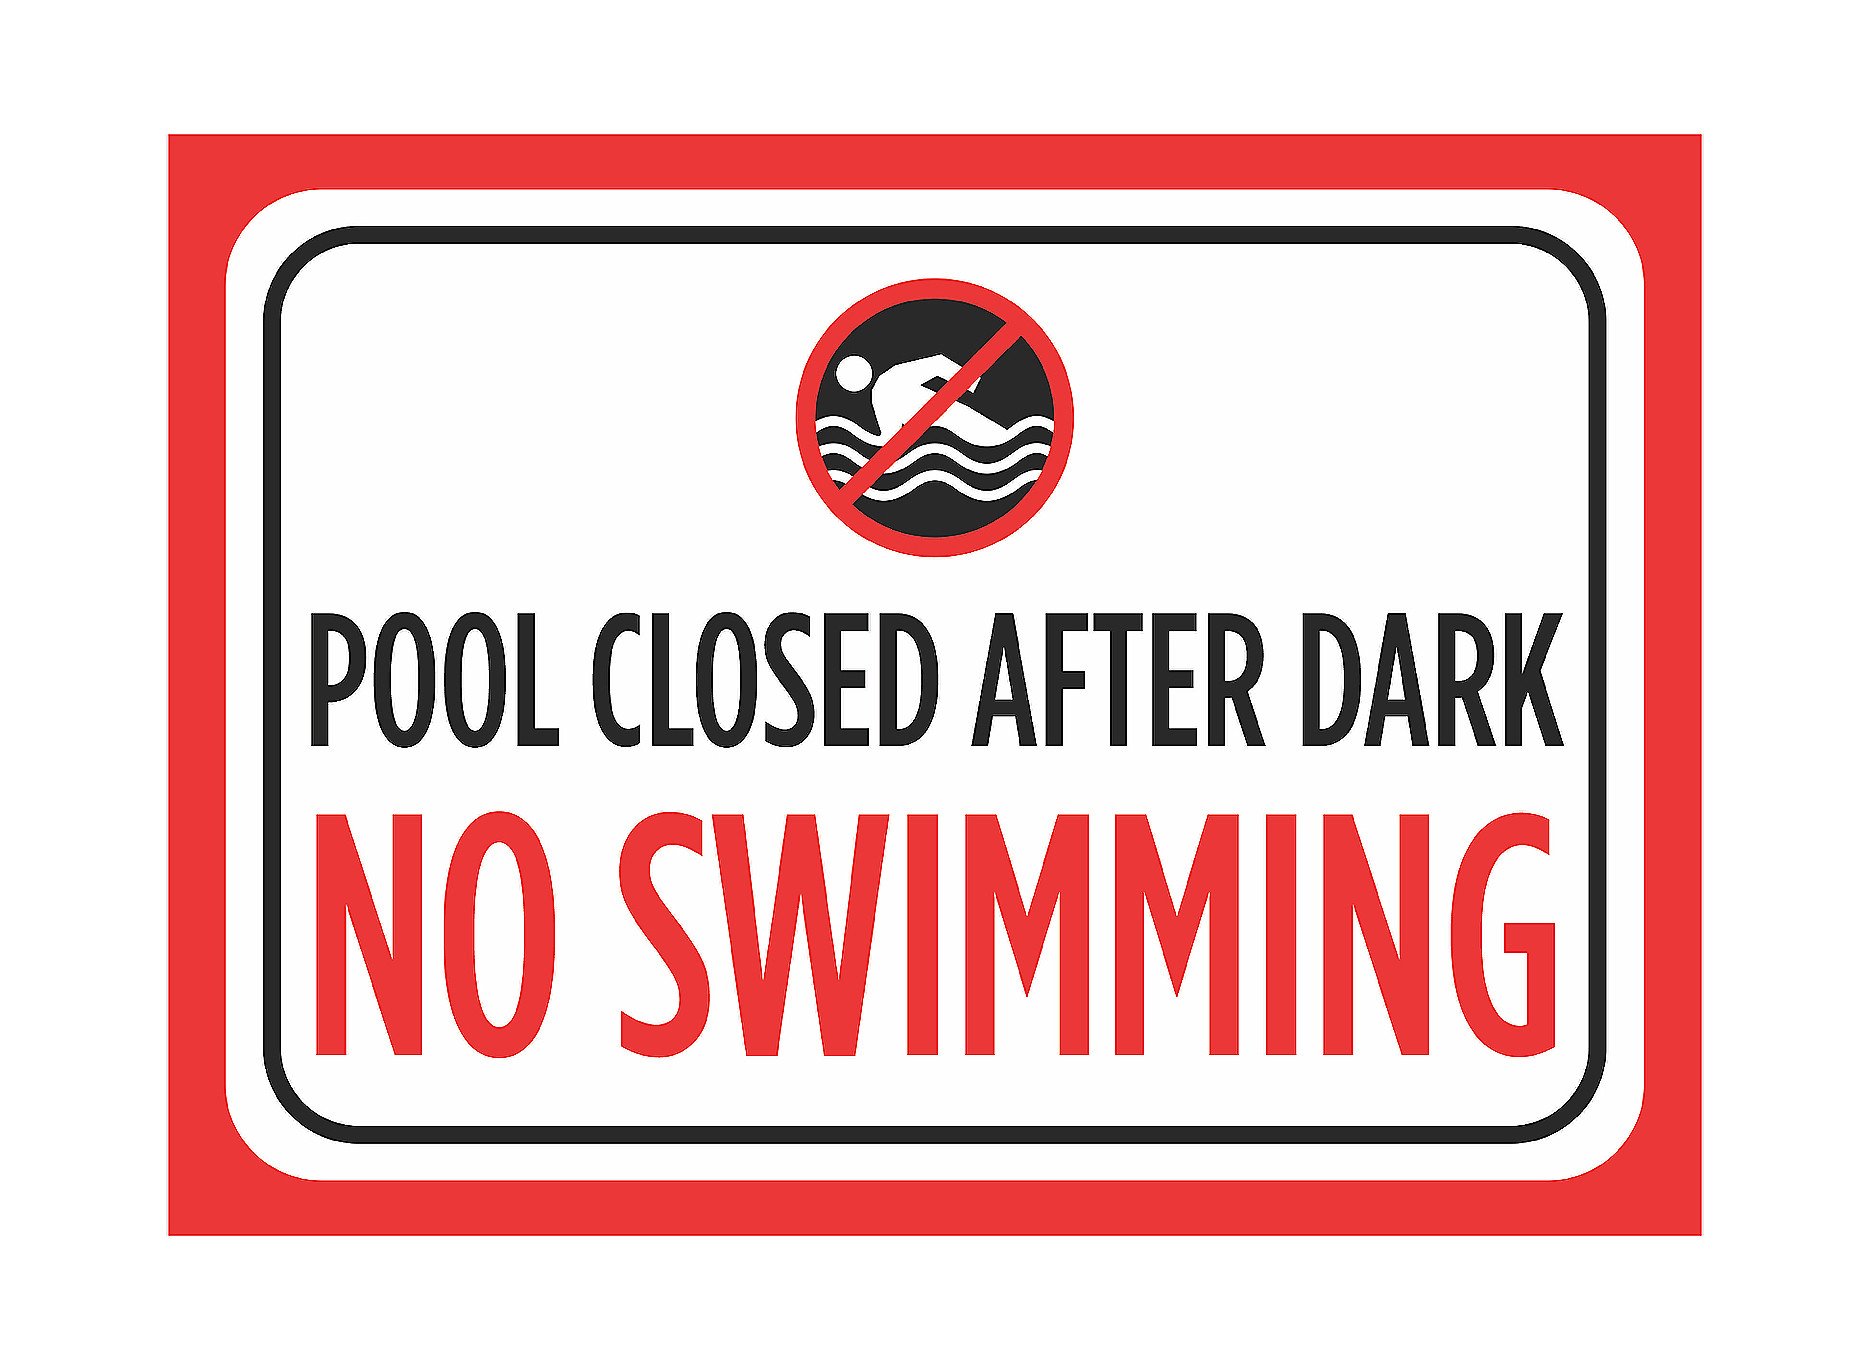 Pool Closed After Dark No Swimming